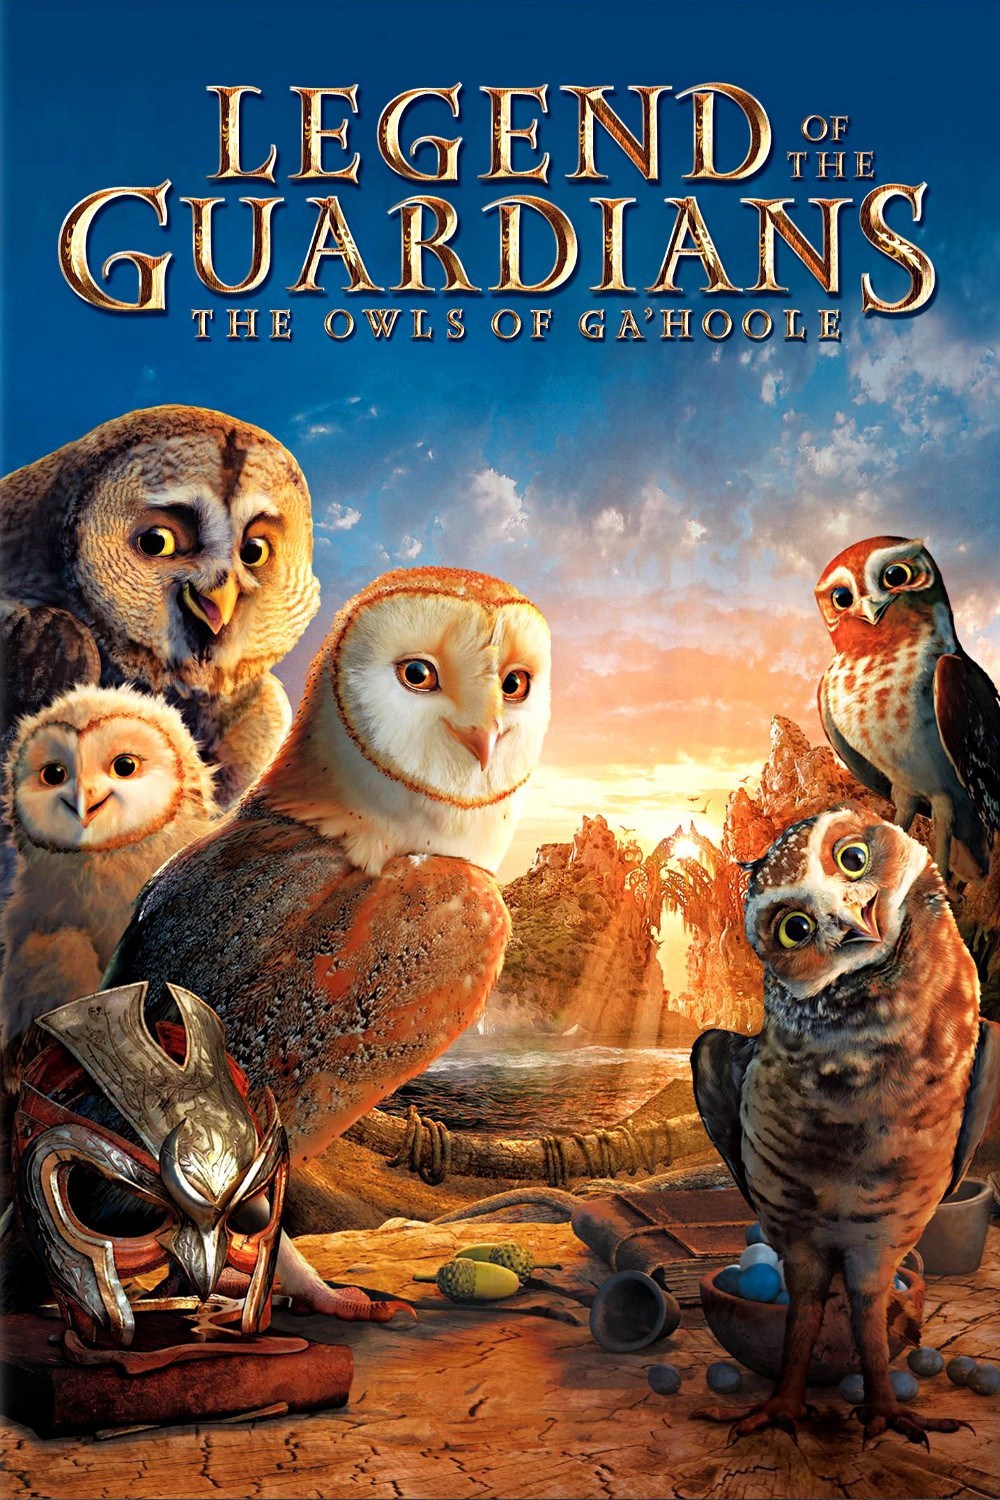 HQ Legend Of The Guardians: The Owls Of Ga'Hoole Wallpapers | File 451.88Kb